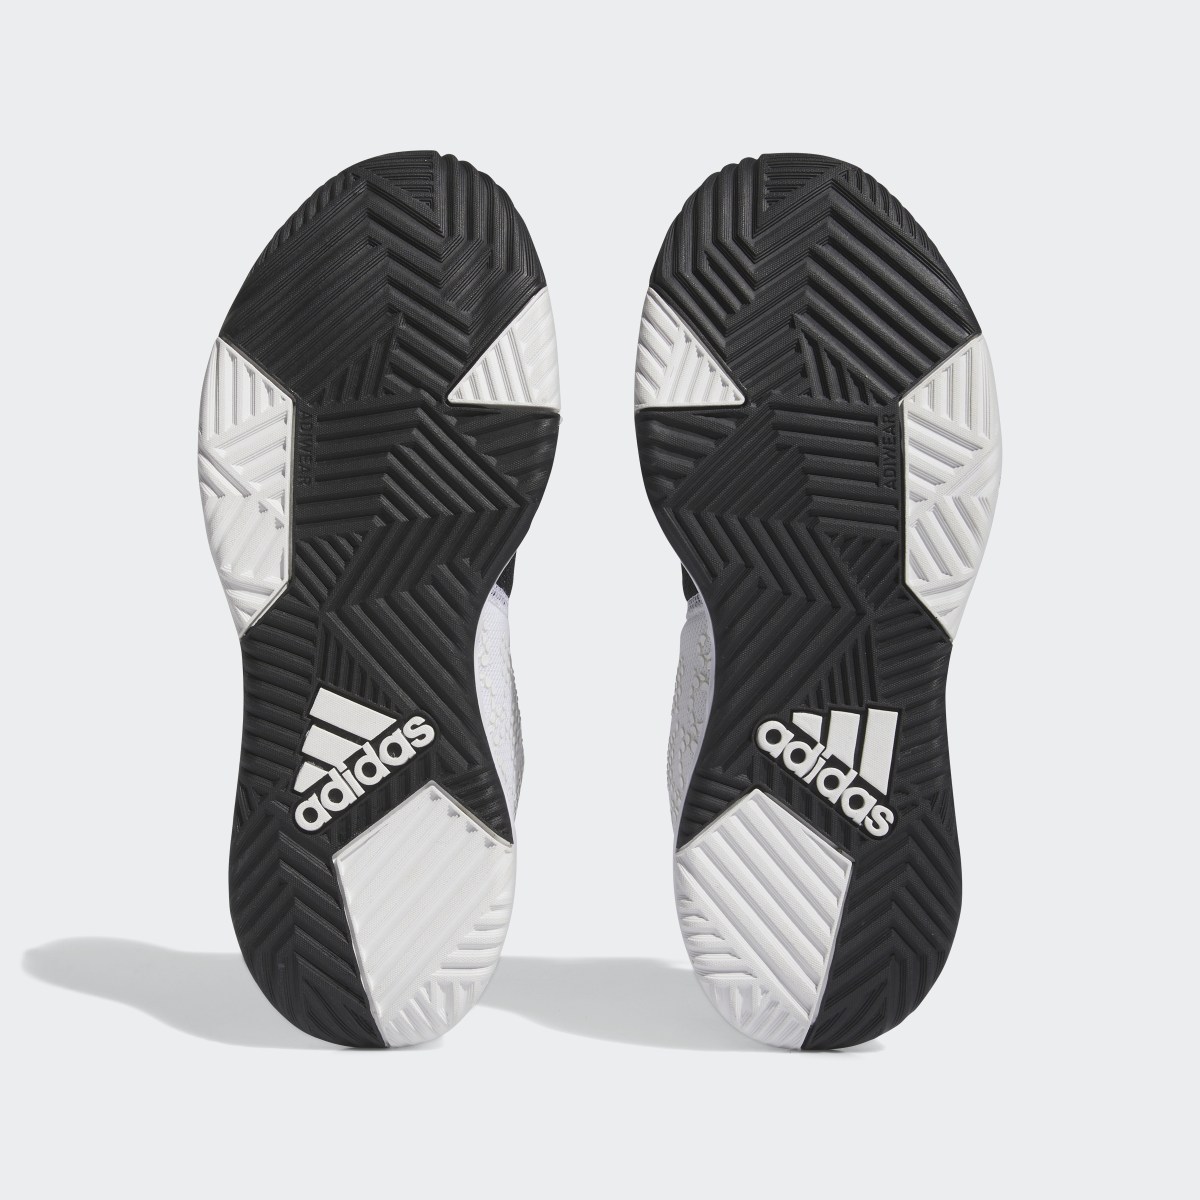 Adidas Ownthegame Basketball Shoes. 4